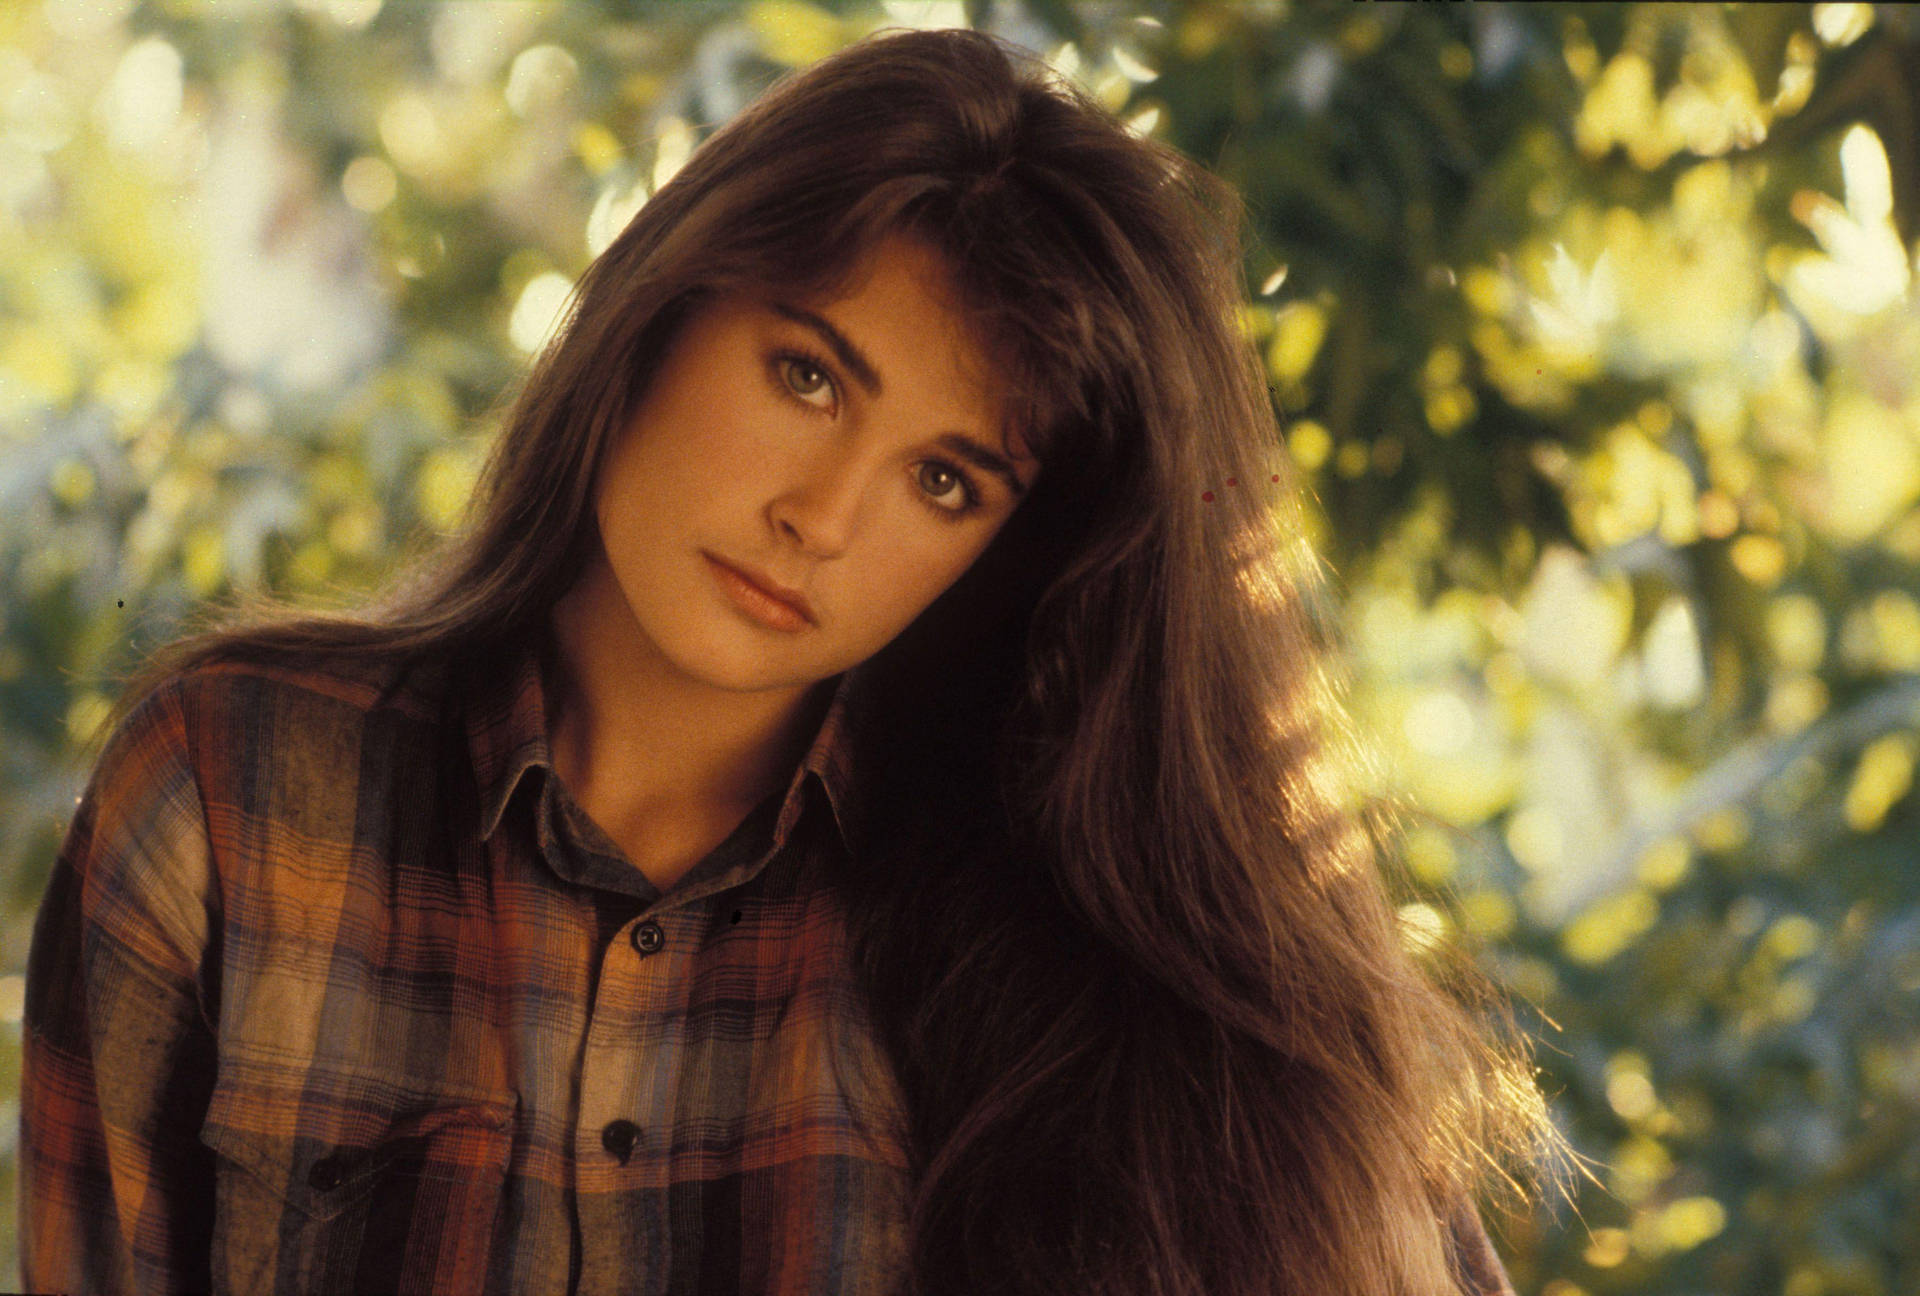 Hollywood Actress Demi Moore Young Still Shot Background